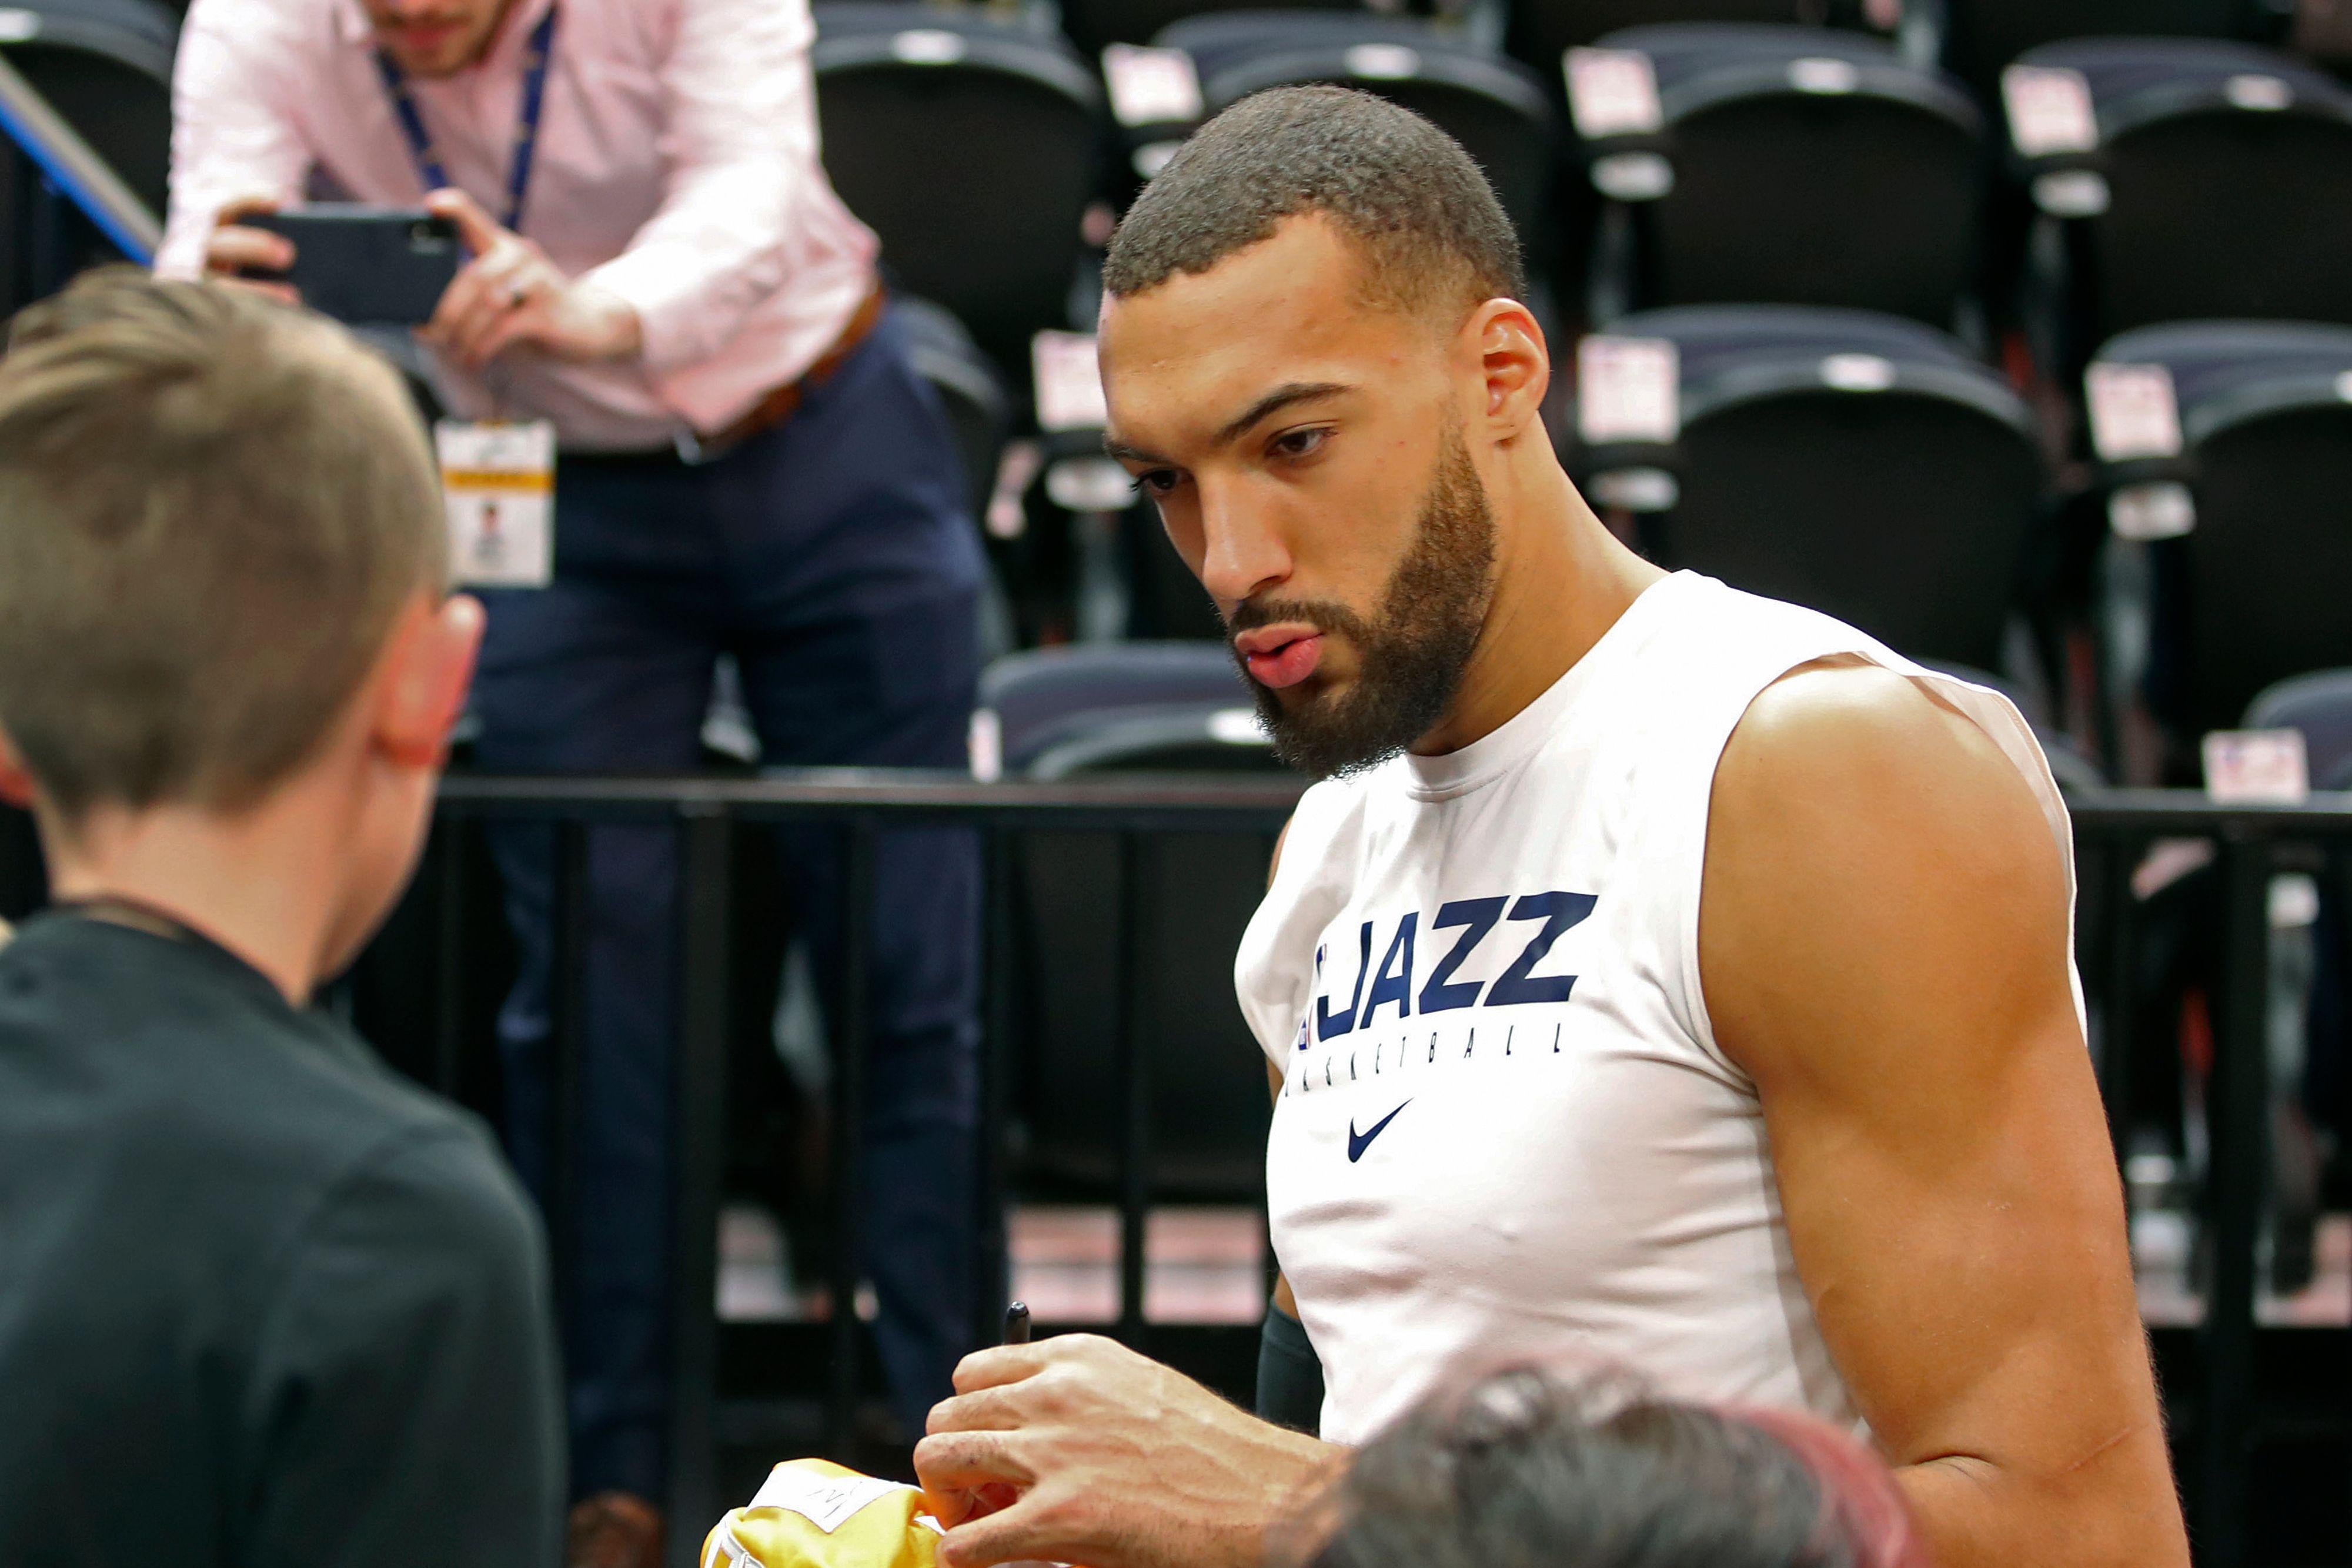 Gobert stands in the arena, signing autographs for fans